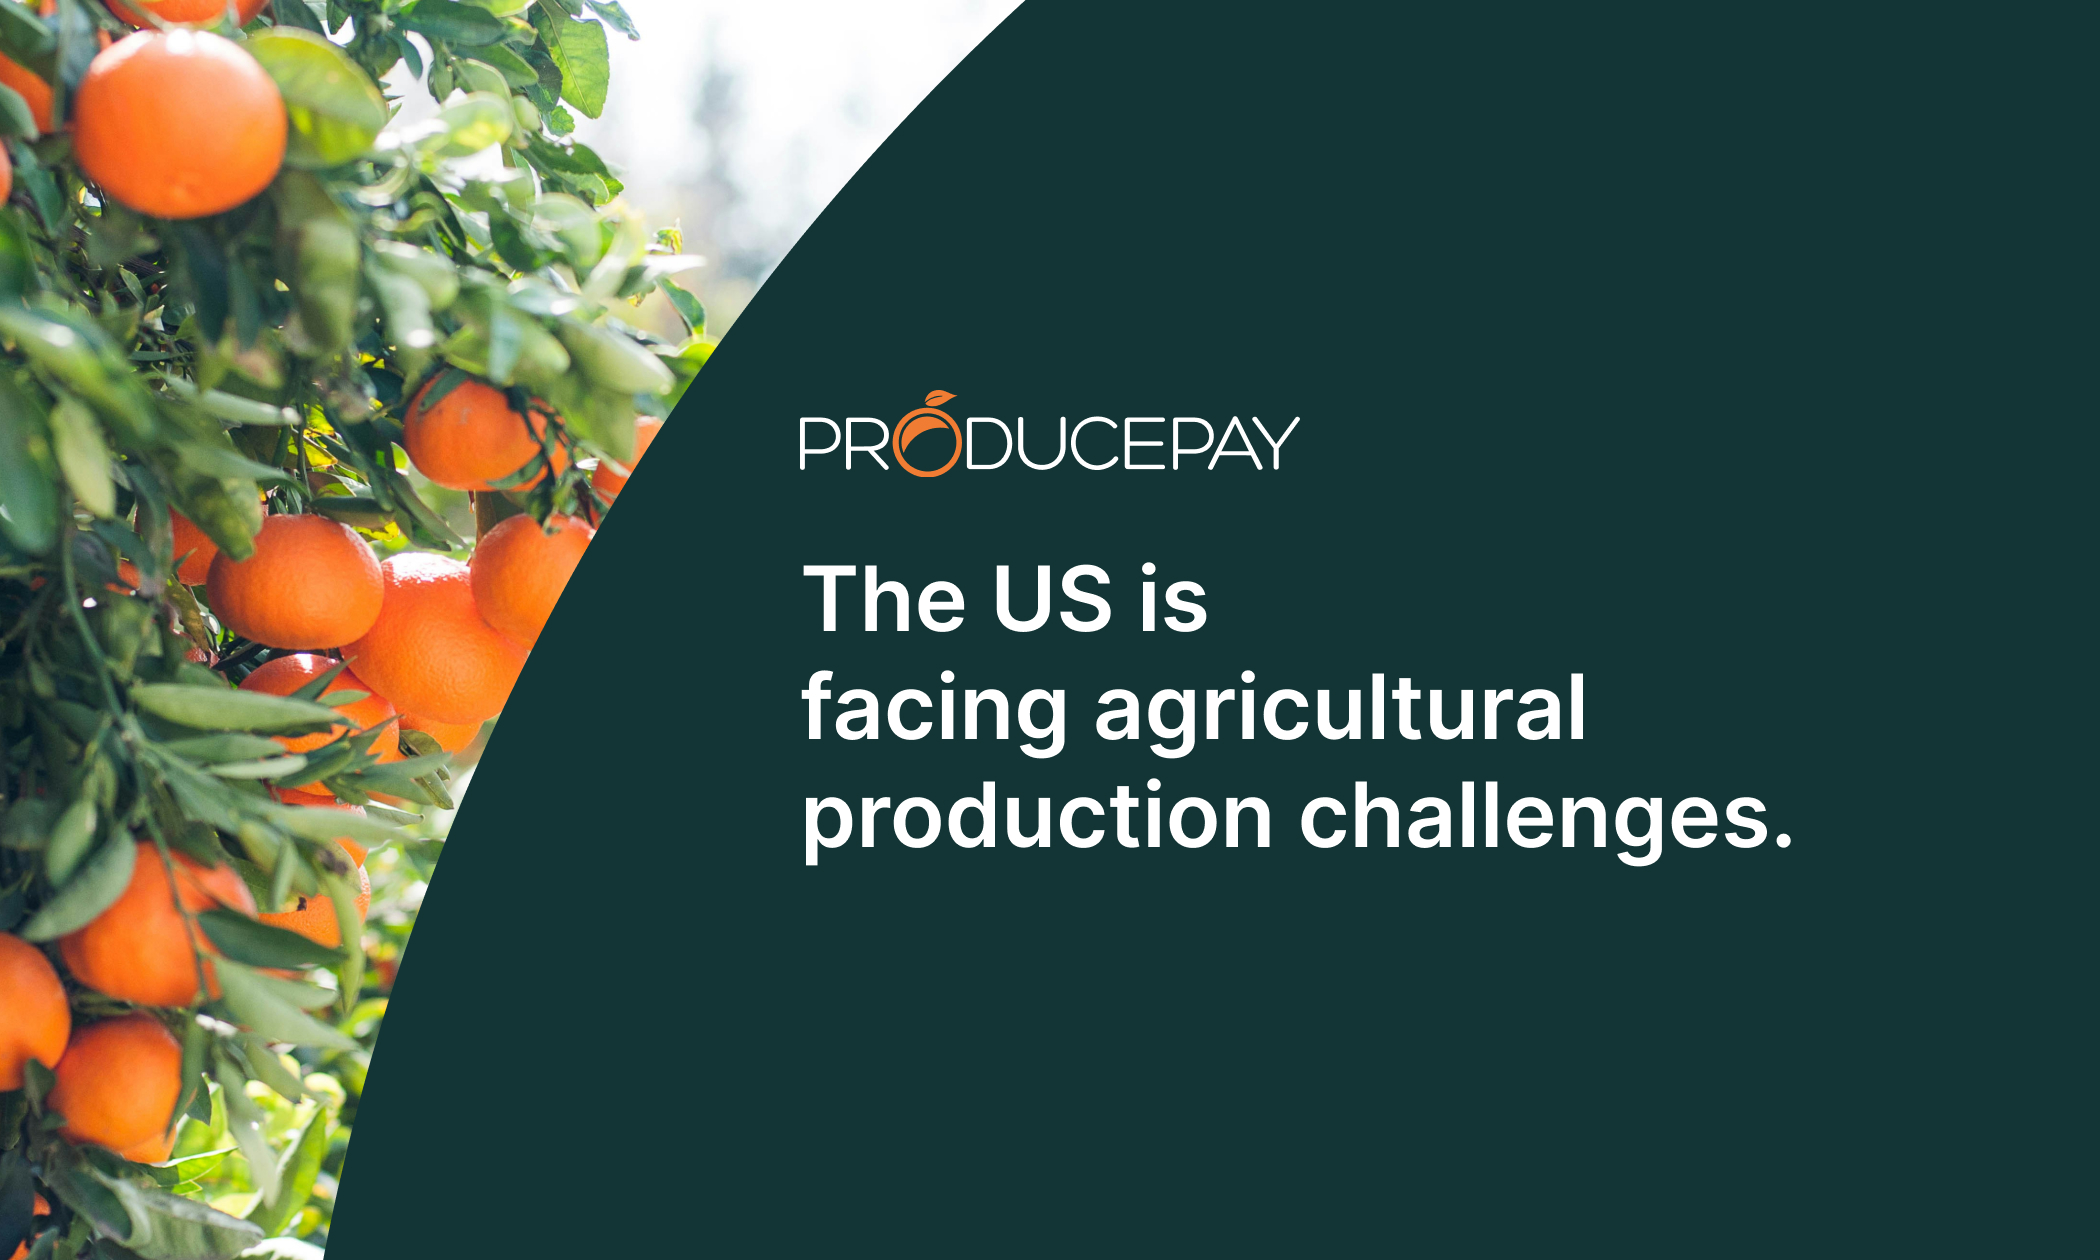 The US is facing agricultural production challenges